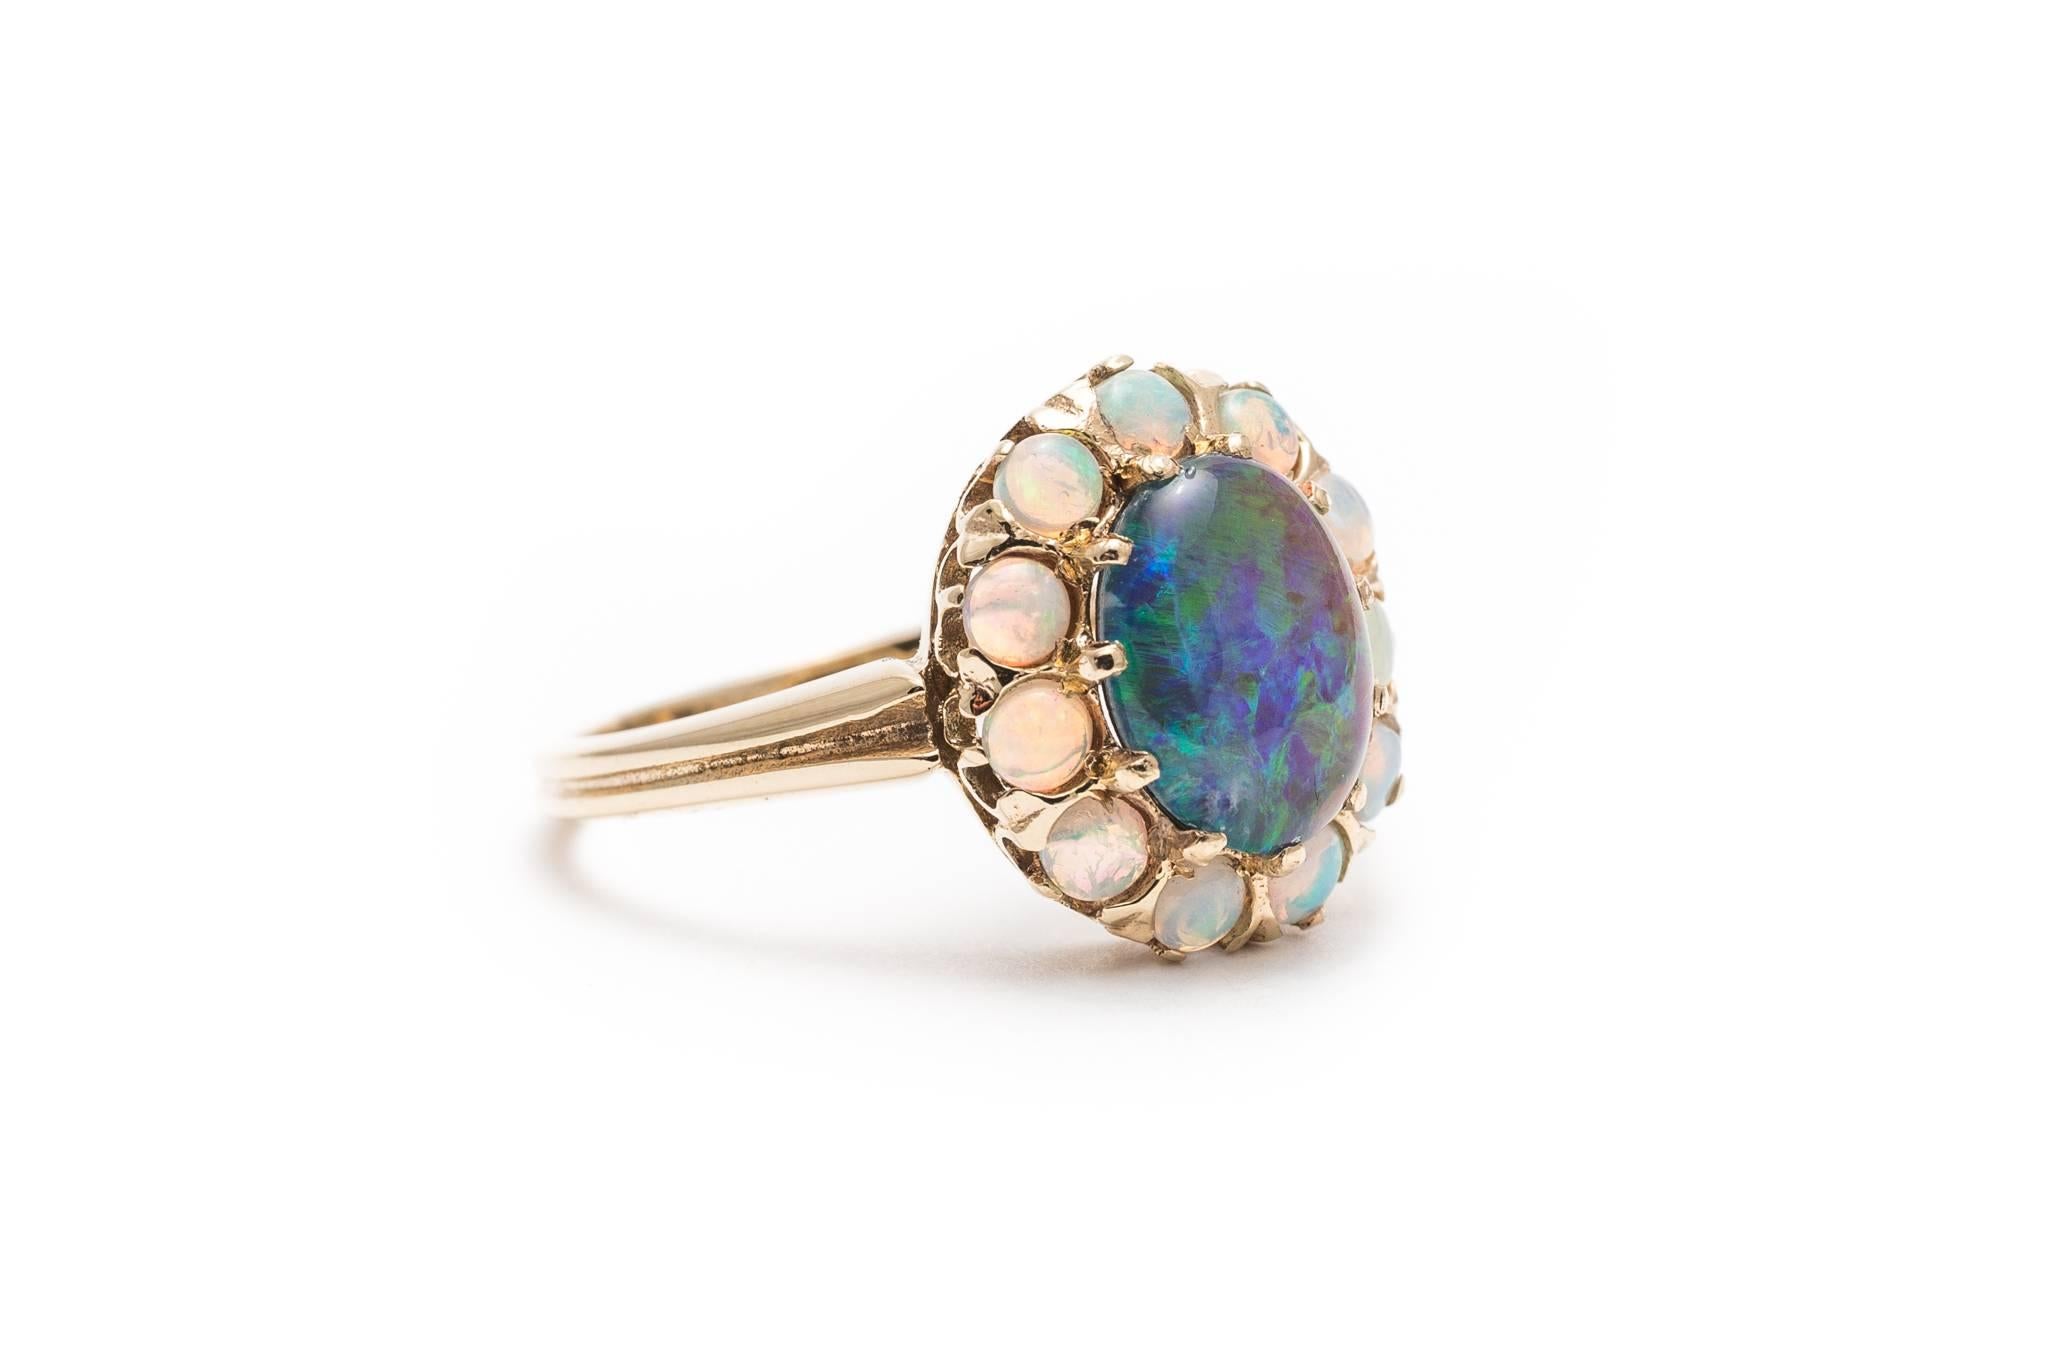 Beacon Hill Jewelers Presents:

A beautiful opal ring in yellow gold.  Centered by a cabochon cut Lightning Ridge opal this ring features a halo of smaller white Australian opals surrounding the center opal.

Measuring 9mm in length by 7mm in width